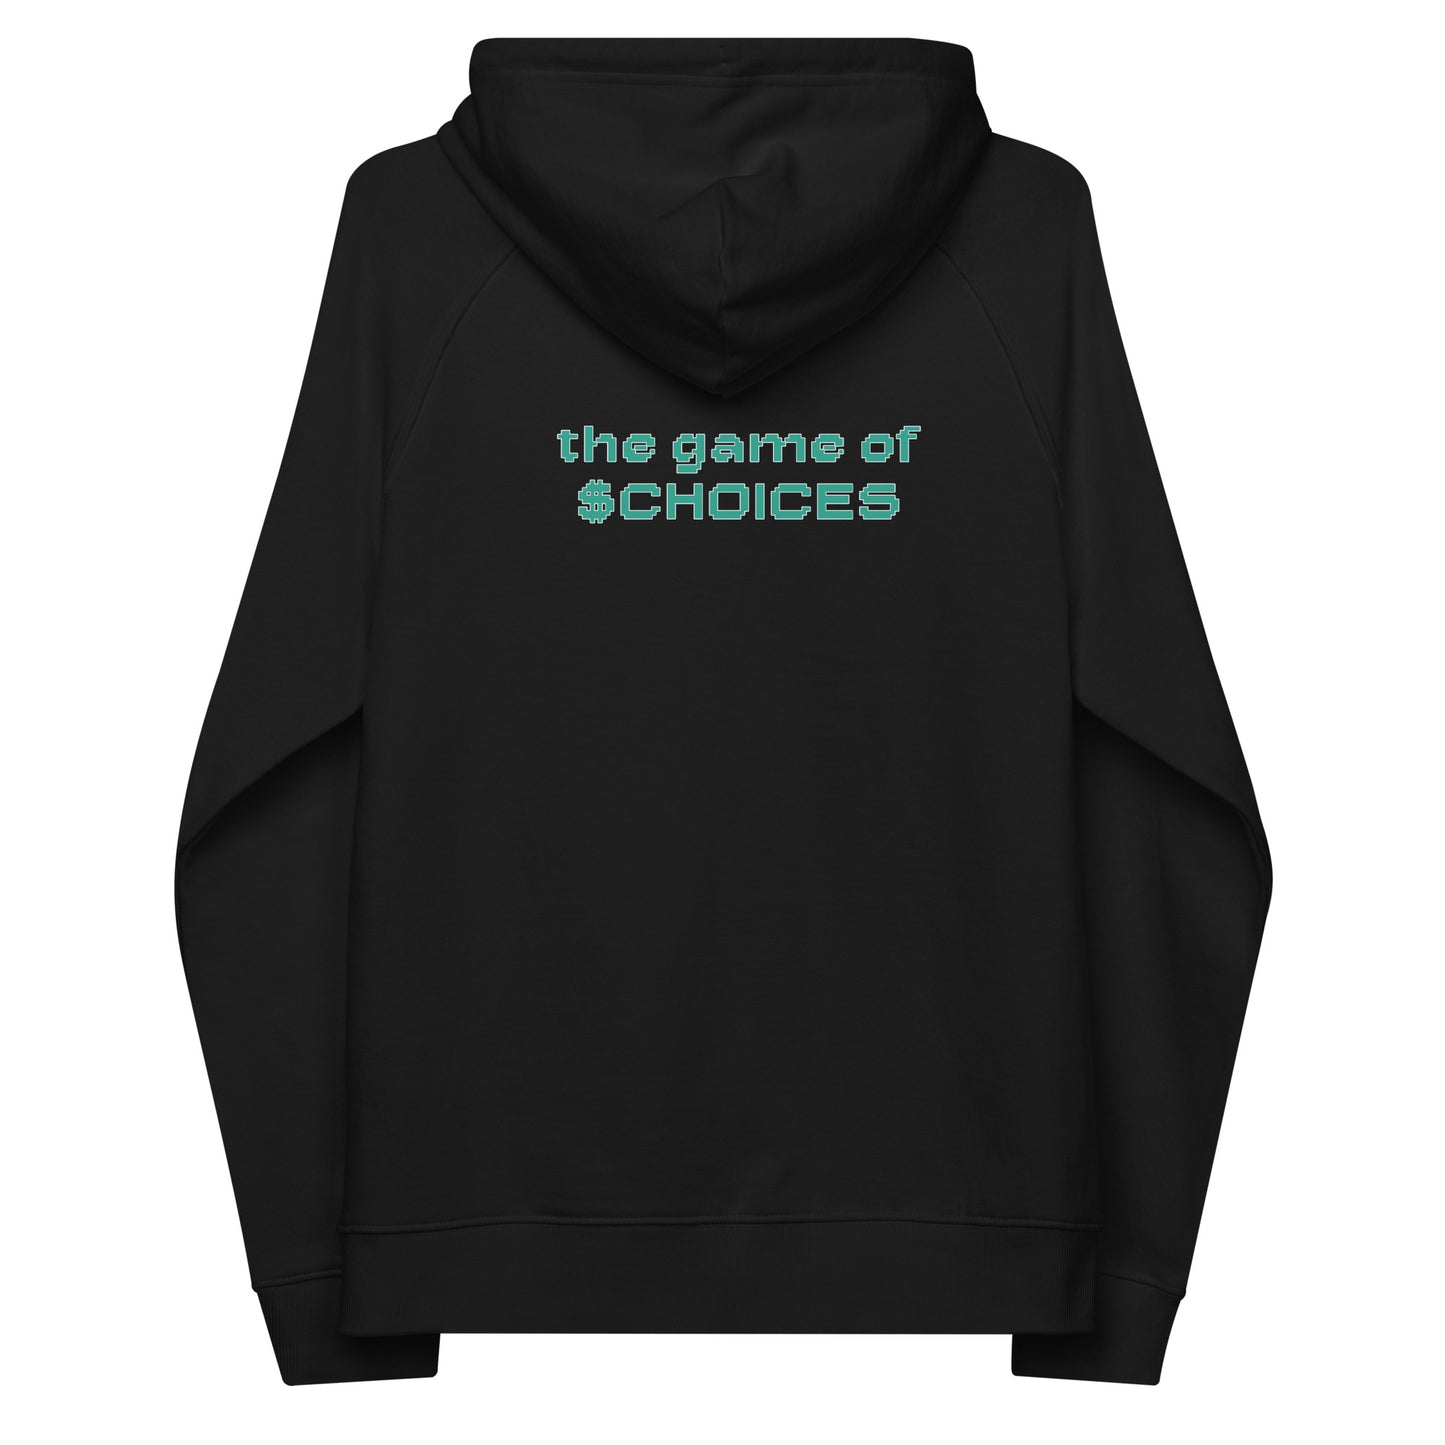 the game of $choices hoodie